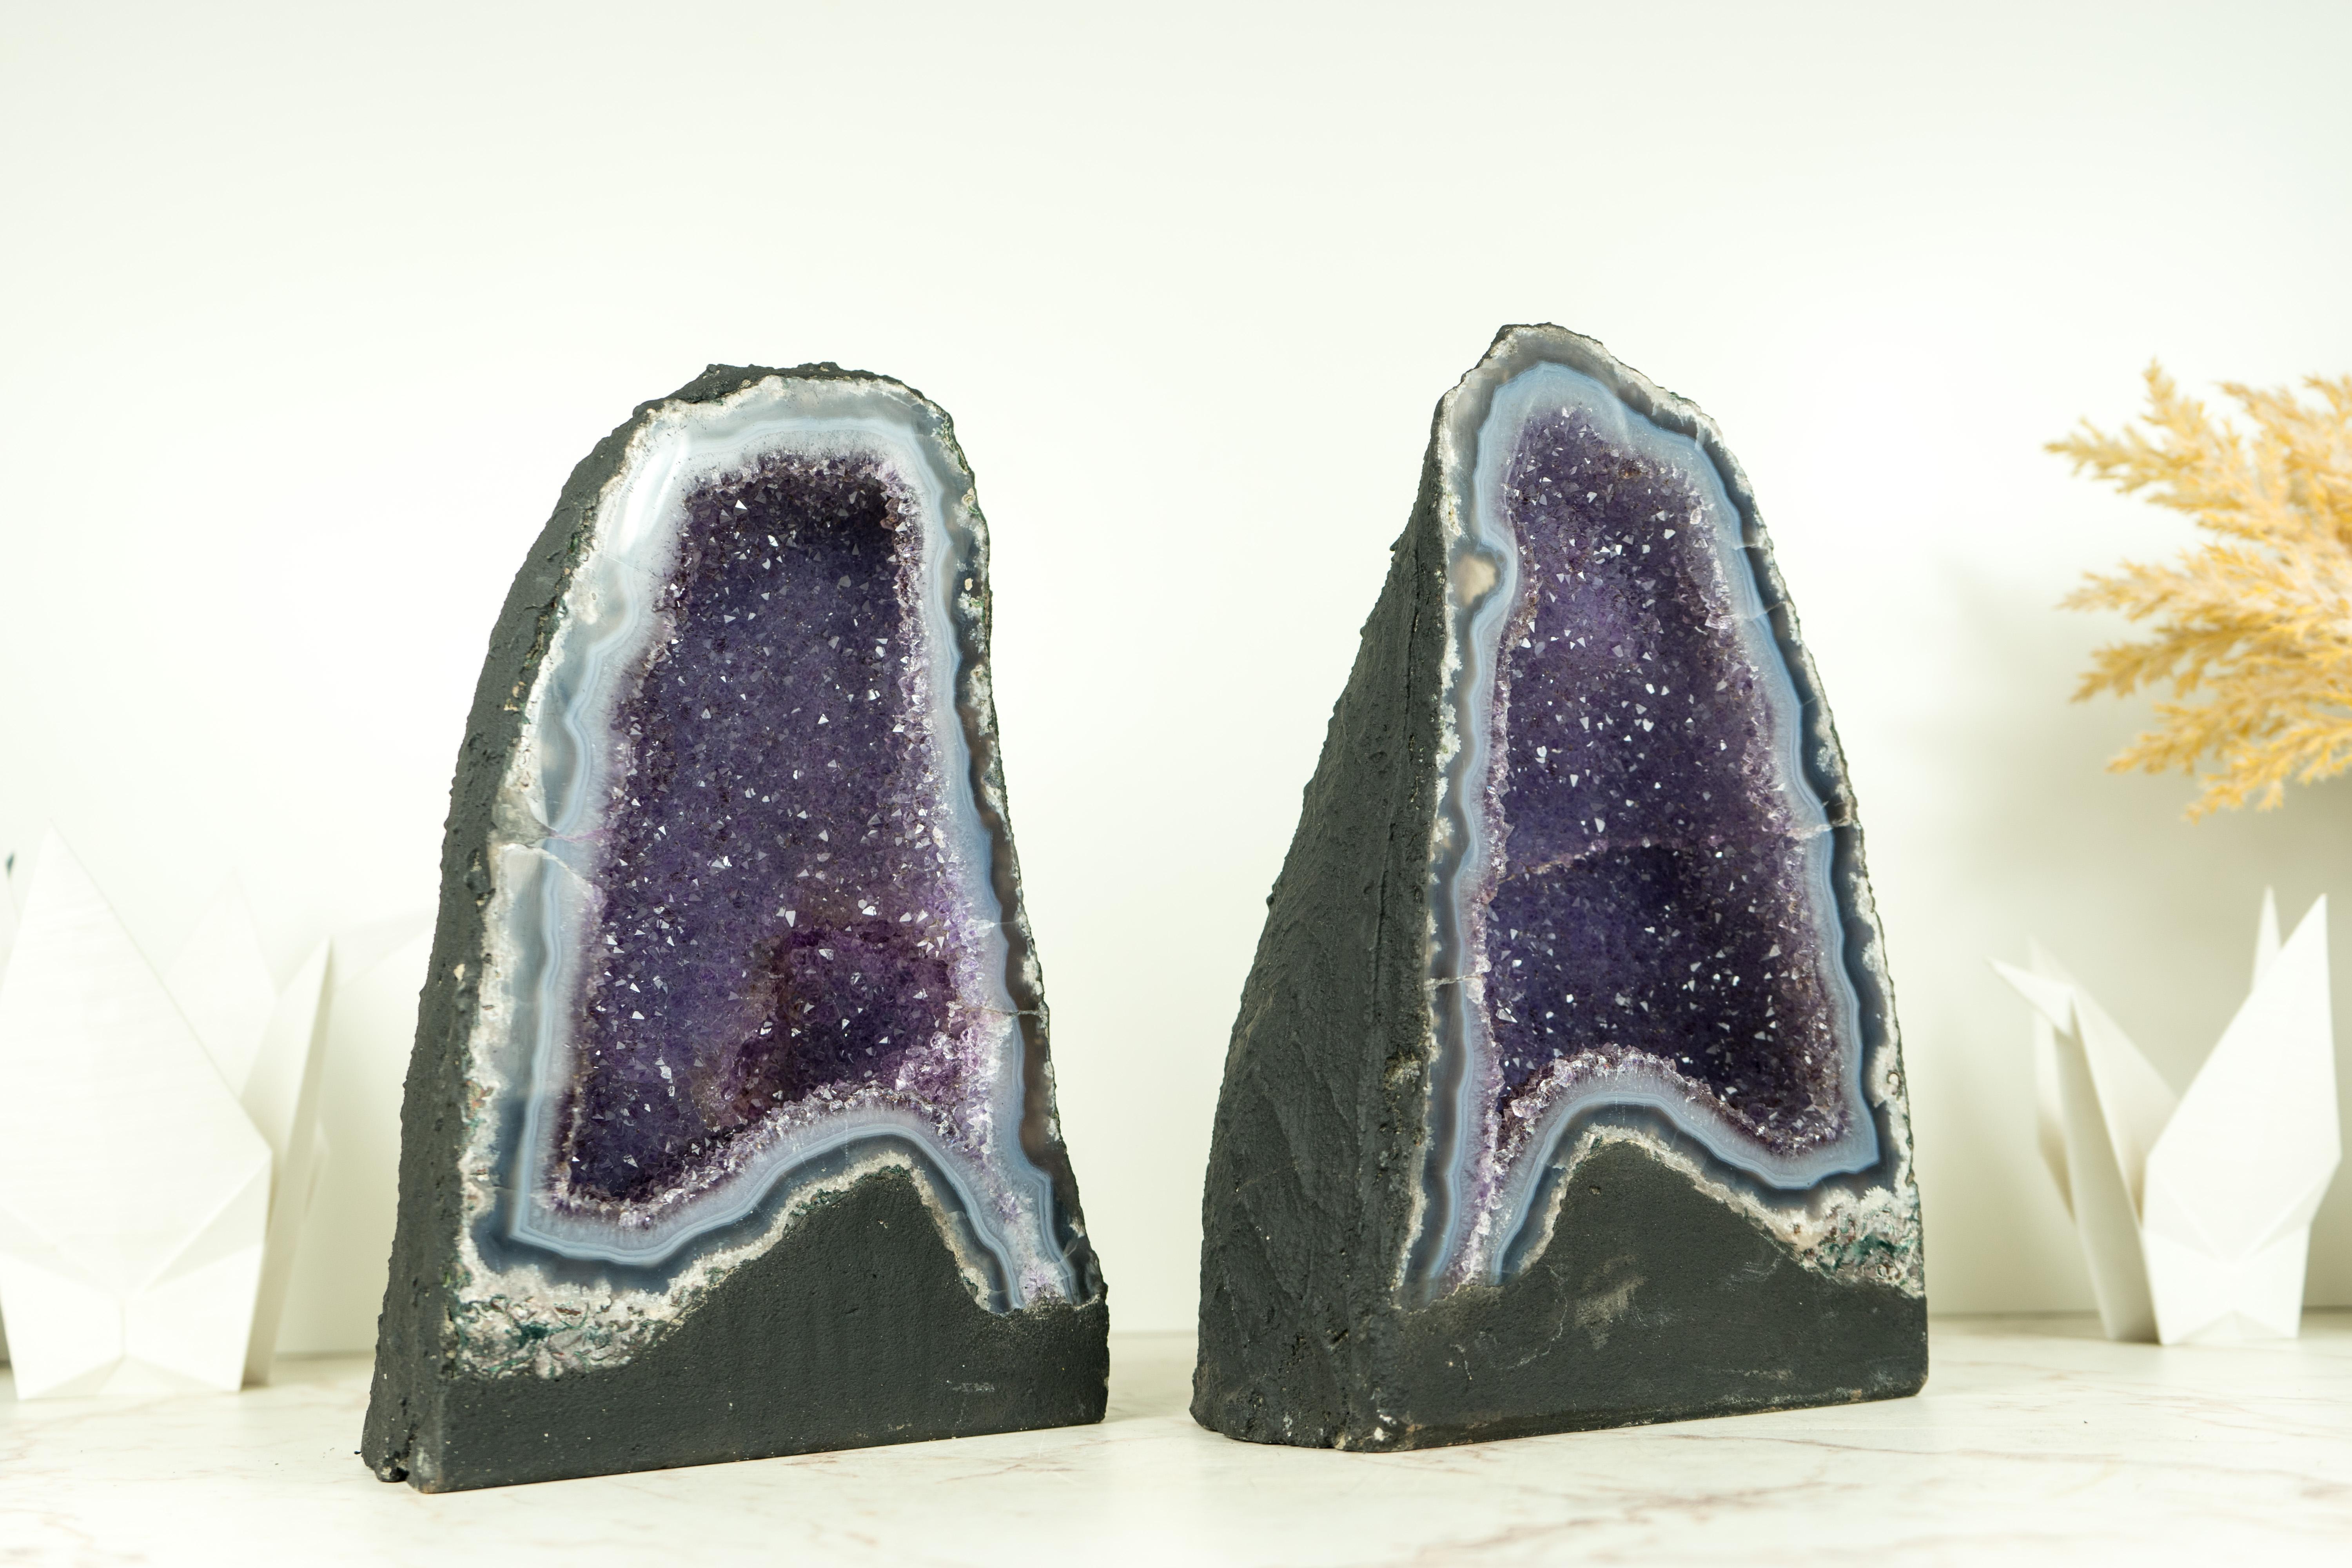 Pair of High-Grade Small Blue Lace Agate Geodes with Sparkly Lavender Amethyst For Sale 3